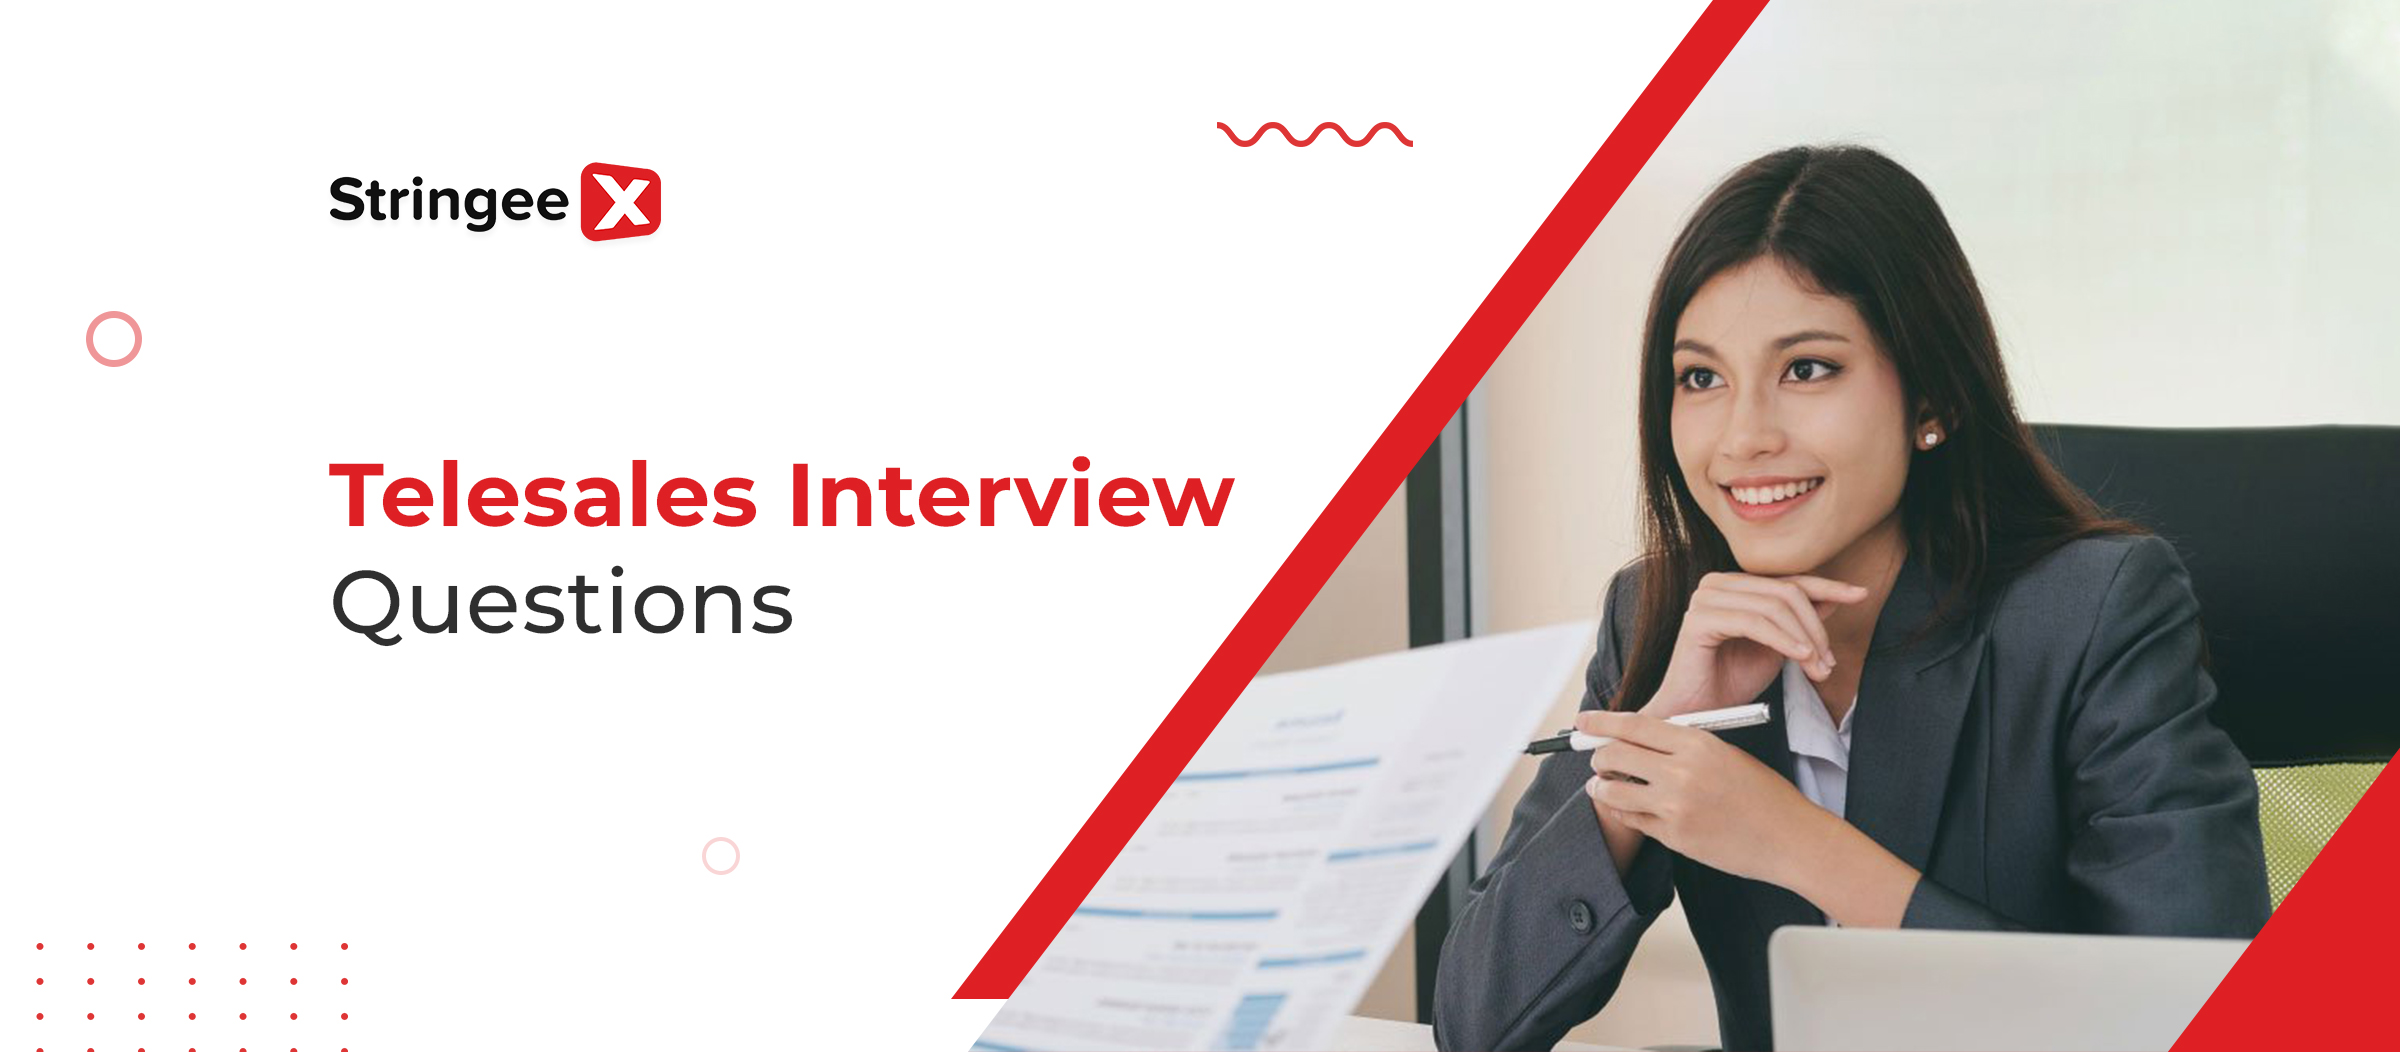 Top 6 Telesales Interview Questions With Example Answers